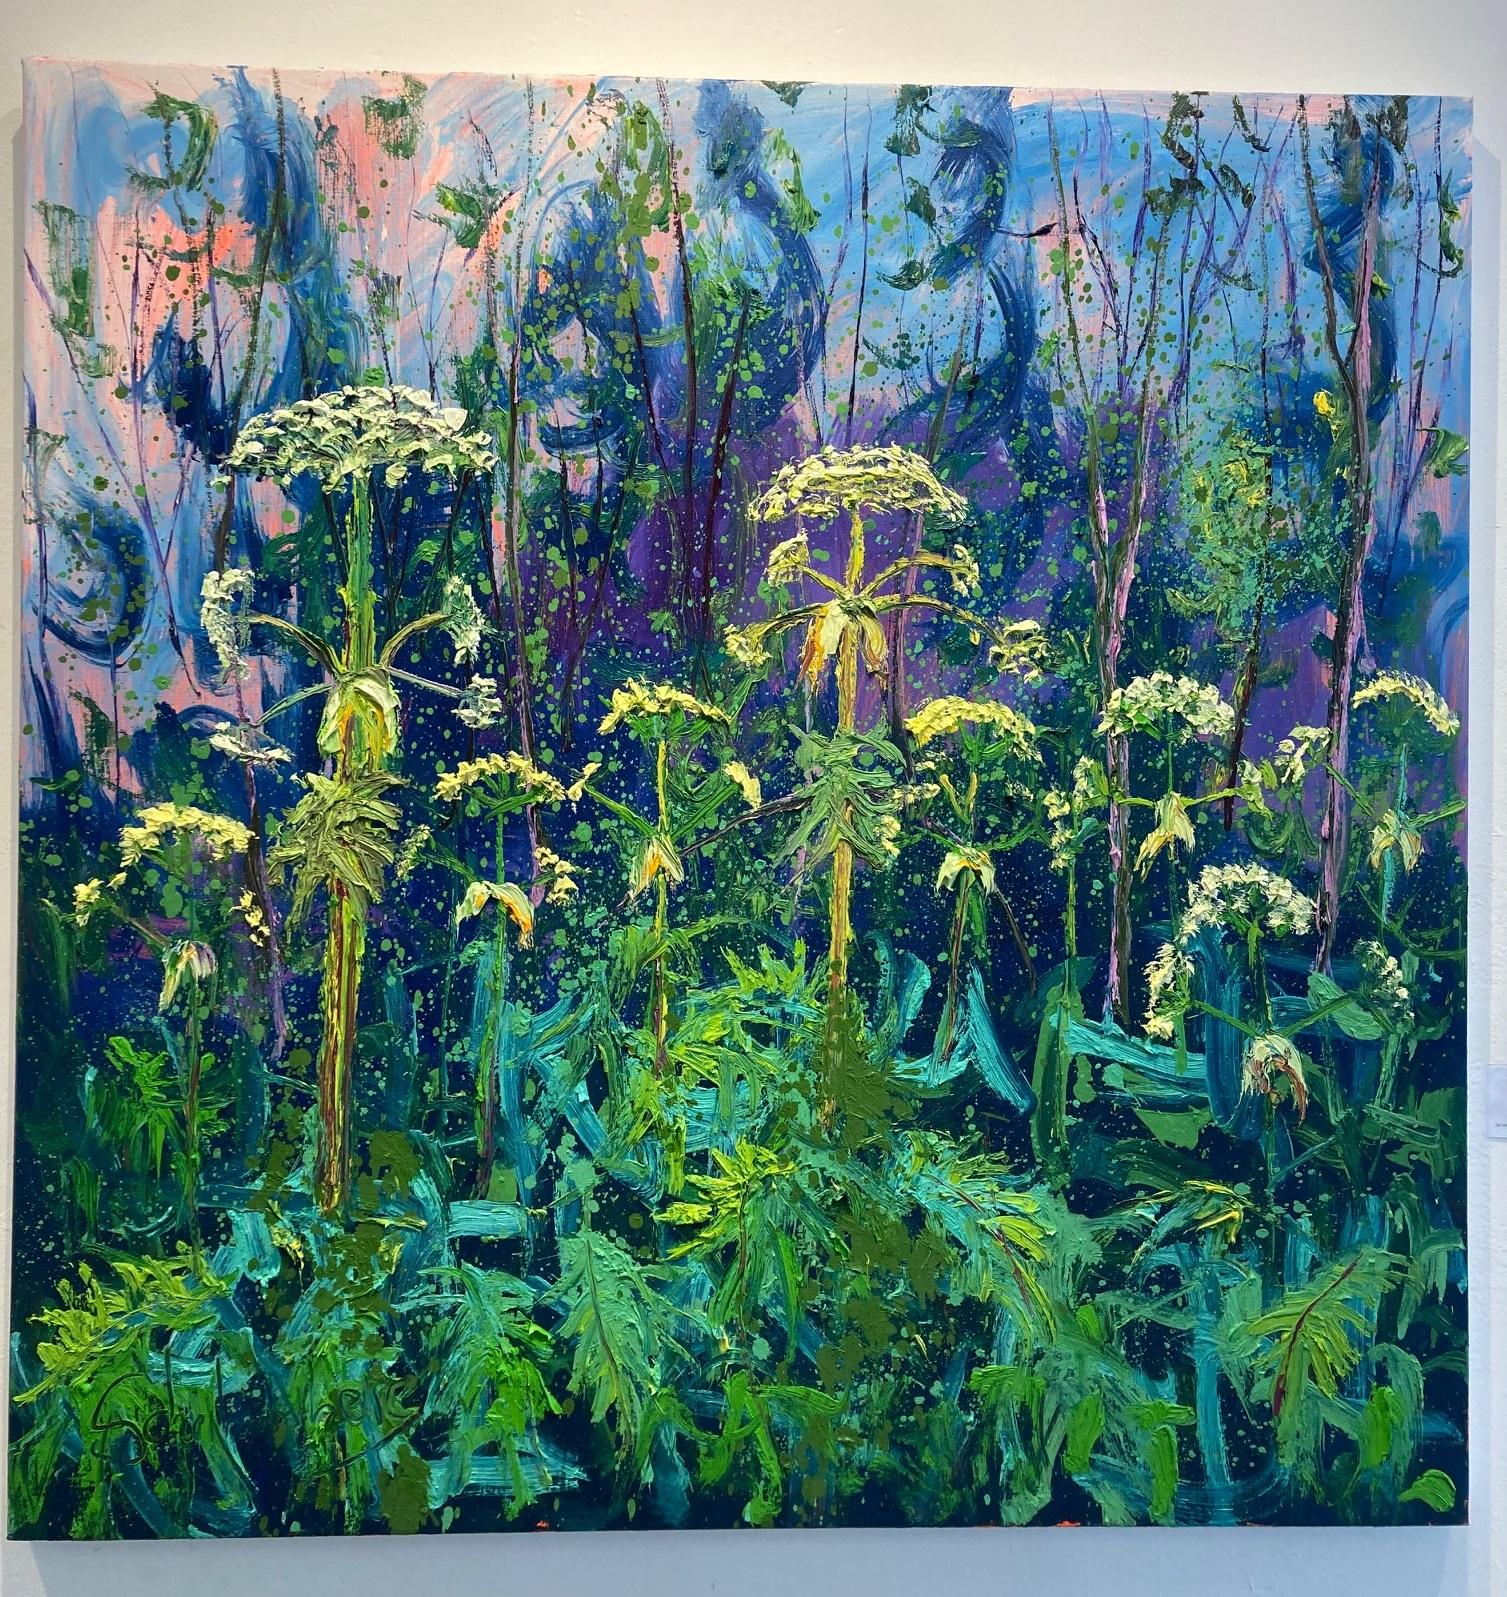 Ultramarine Hogweed Oil Painting on Canvas Nature Outdoor Painter Plein Air

Born in Valthermond, 1971 in The Netherlands. During his studies decided Gertjan to leave the concept of painting in a studio and embraced the rich experience of painting